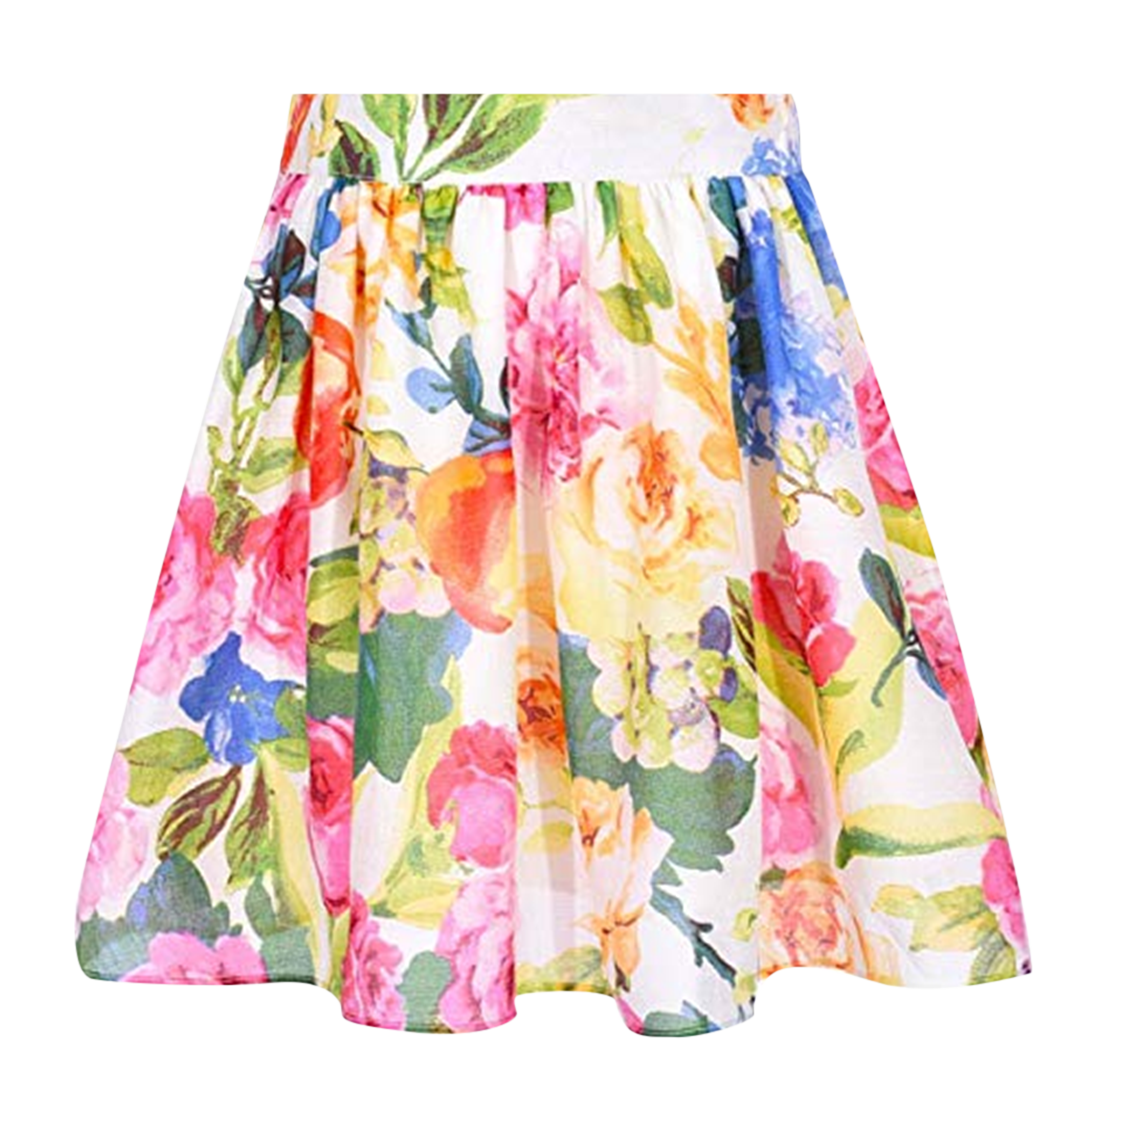 Skirts PNG HD Quality - PNG Play